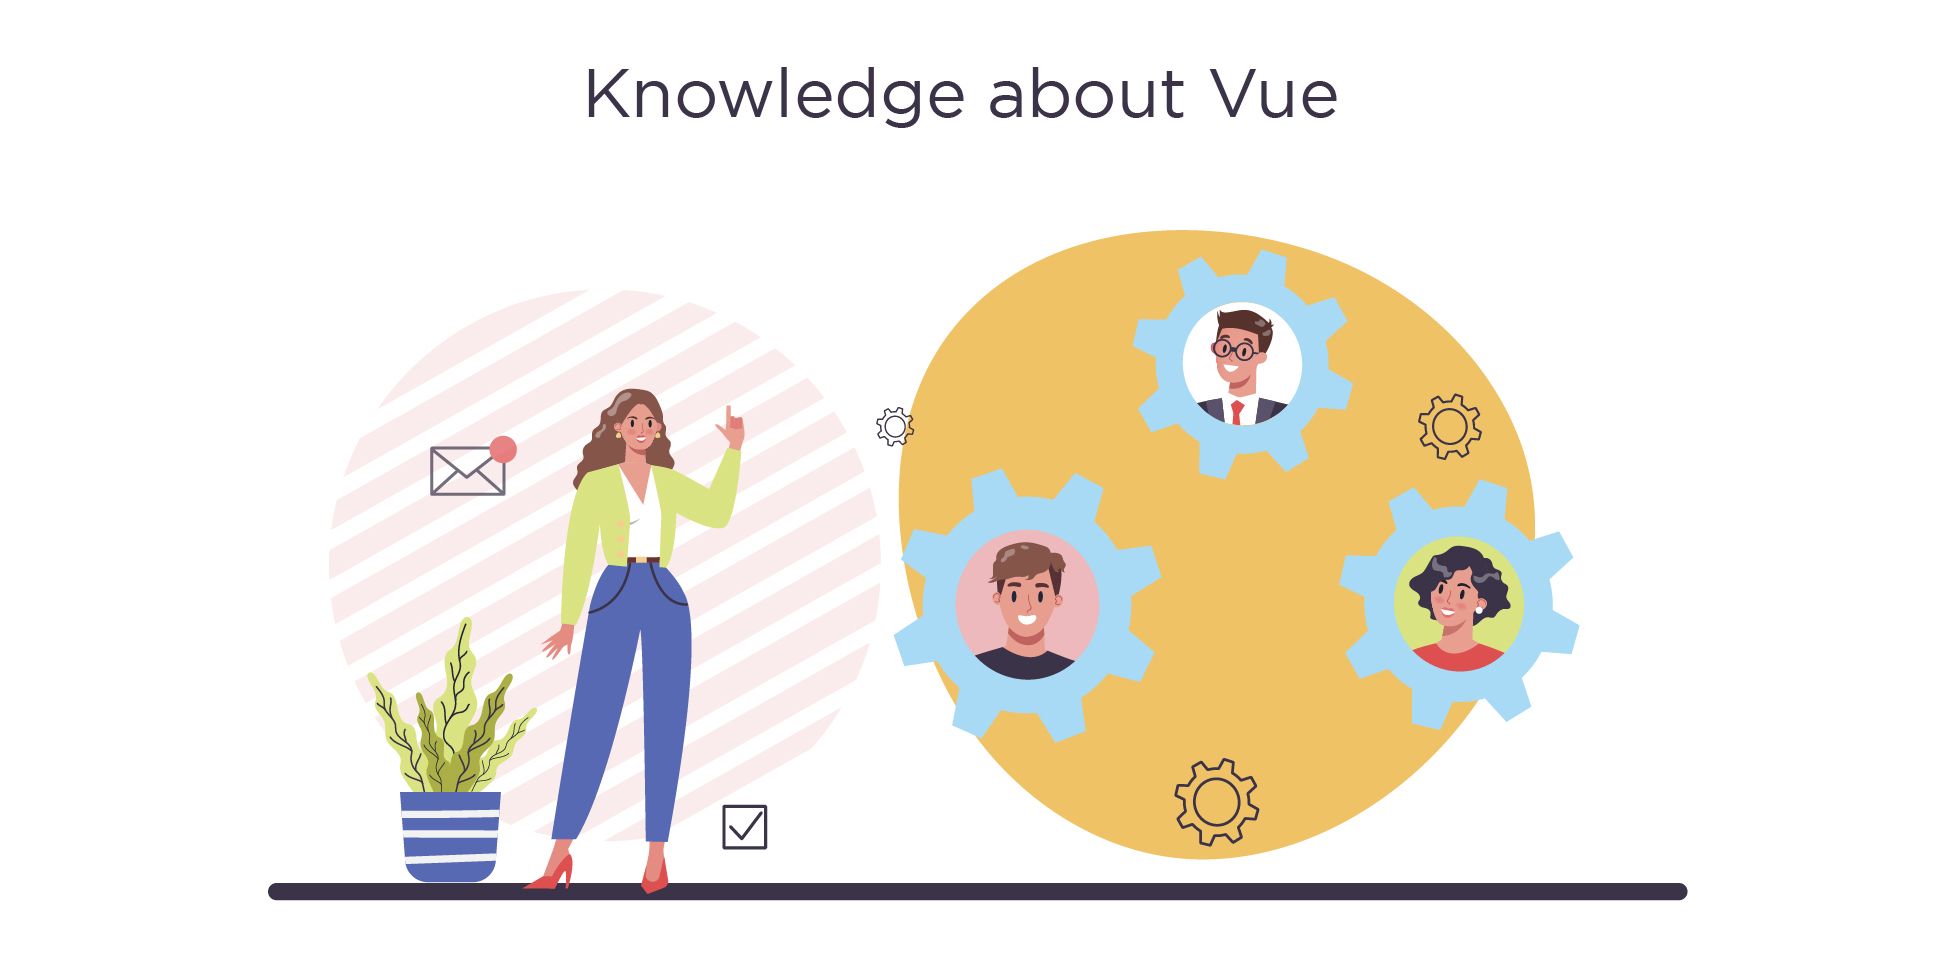 Knowledge about Vue